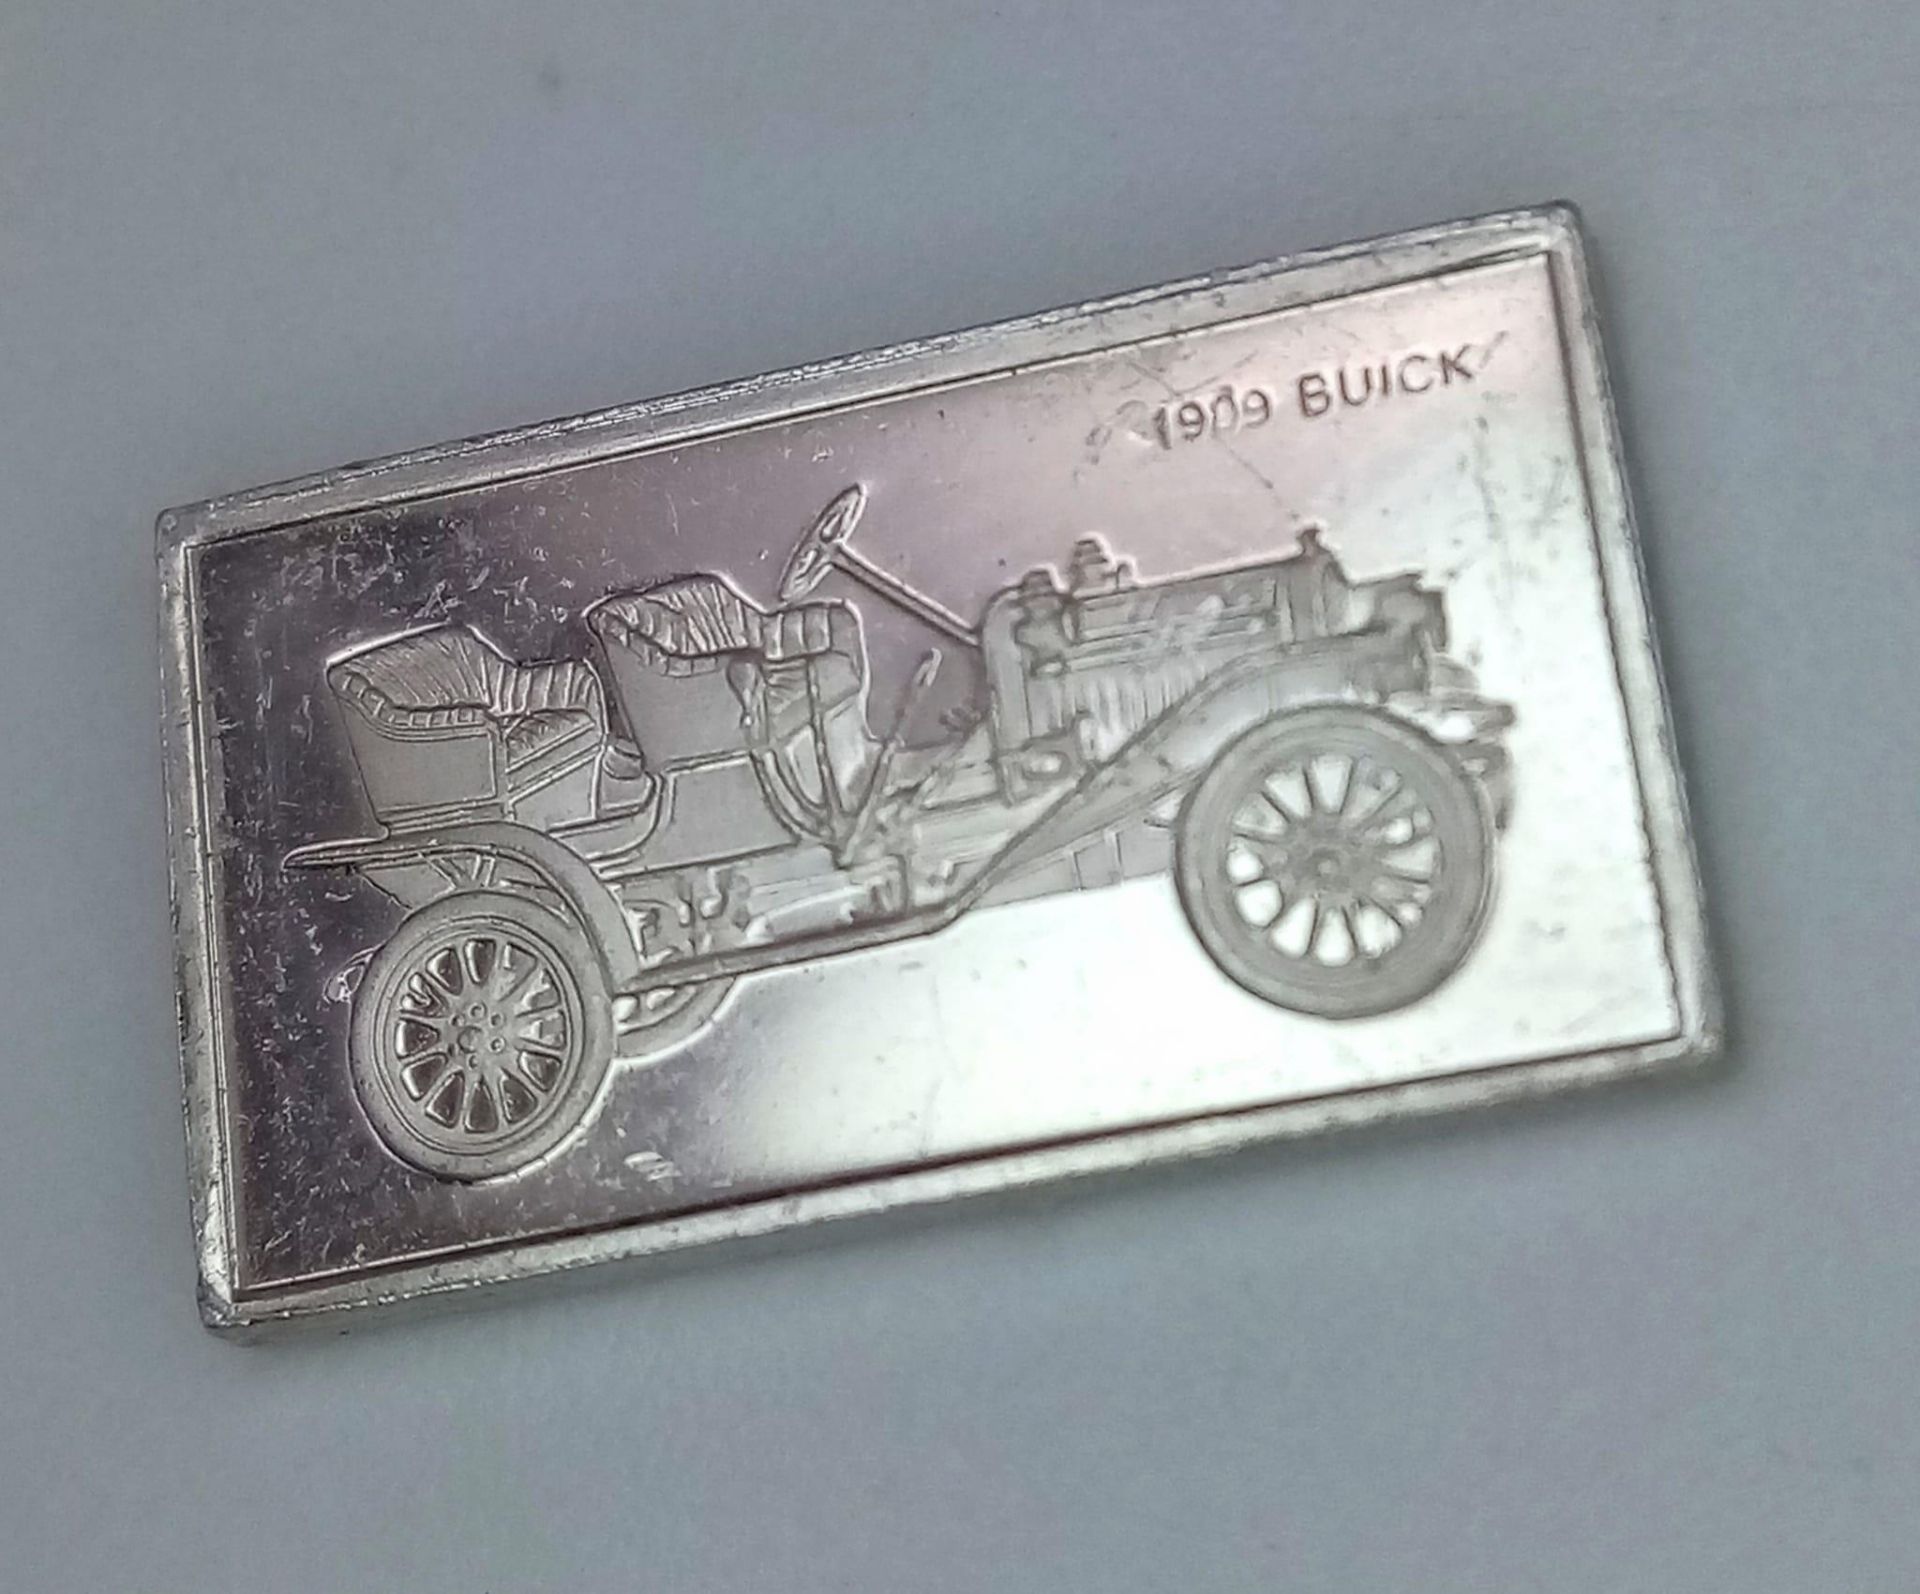 2 X STERLING SILVER AND ENAMEL BUICK CAR LOGO MANUFACTURER PLAQUES, MADE IN UNITED STATES USA, - Image 3 of 6